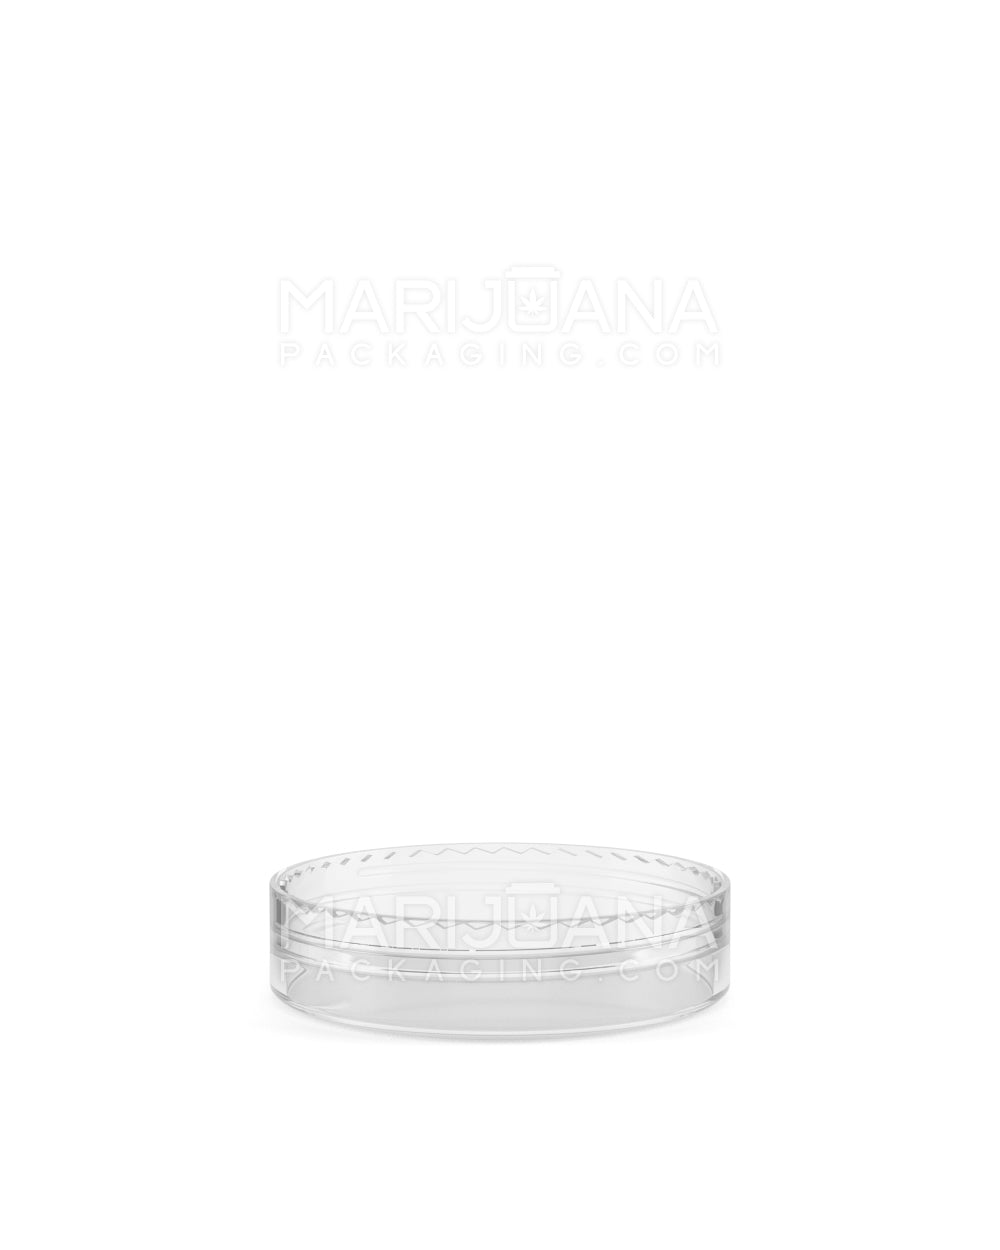 Clear Concentrate Containers w/ Screw Top Cap | 15mL - Plastic | Sample - 11